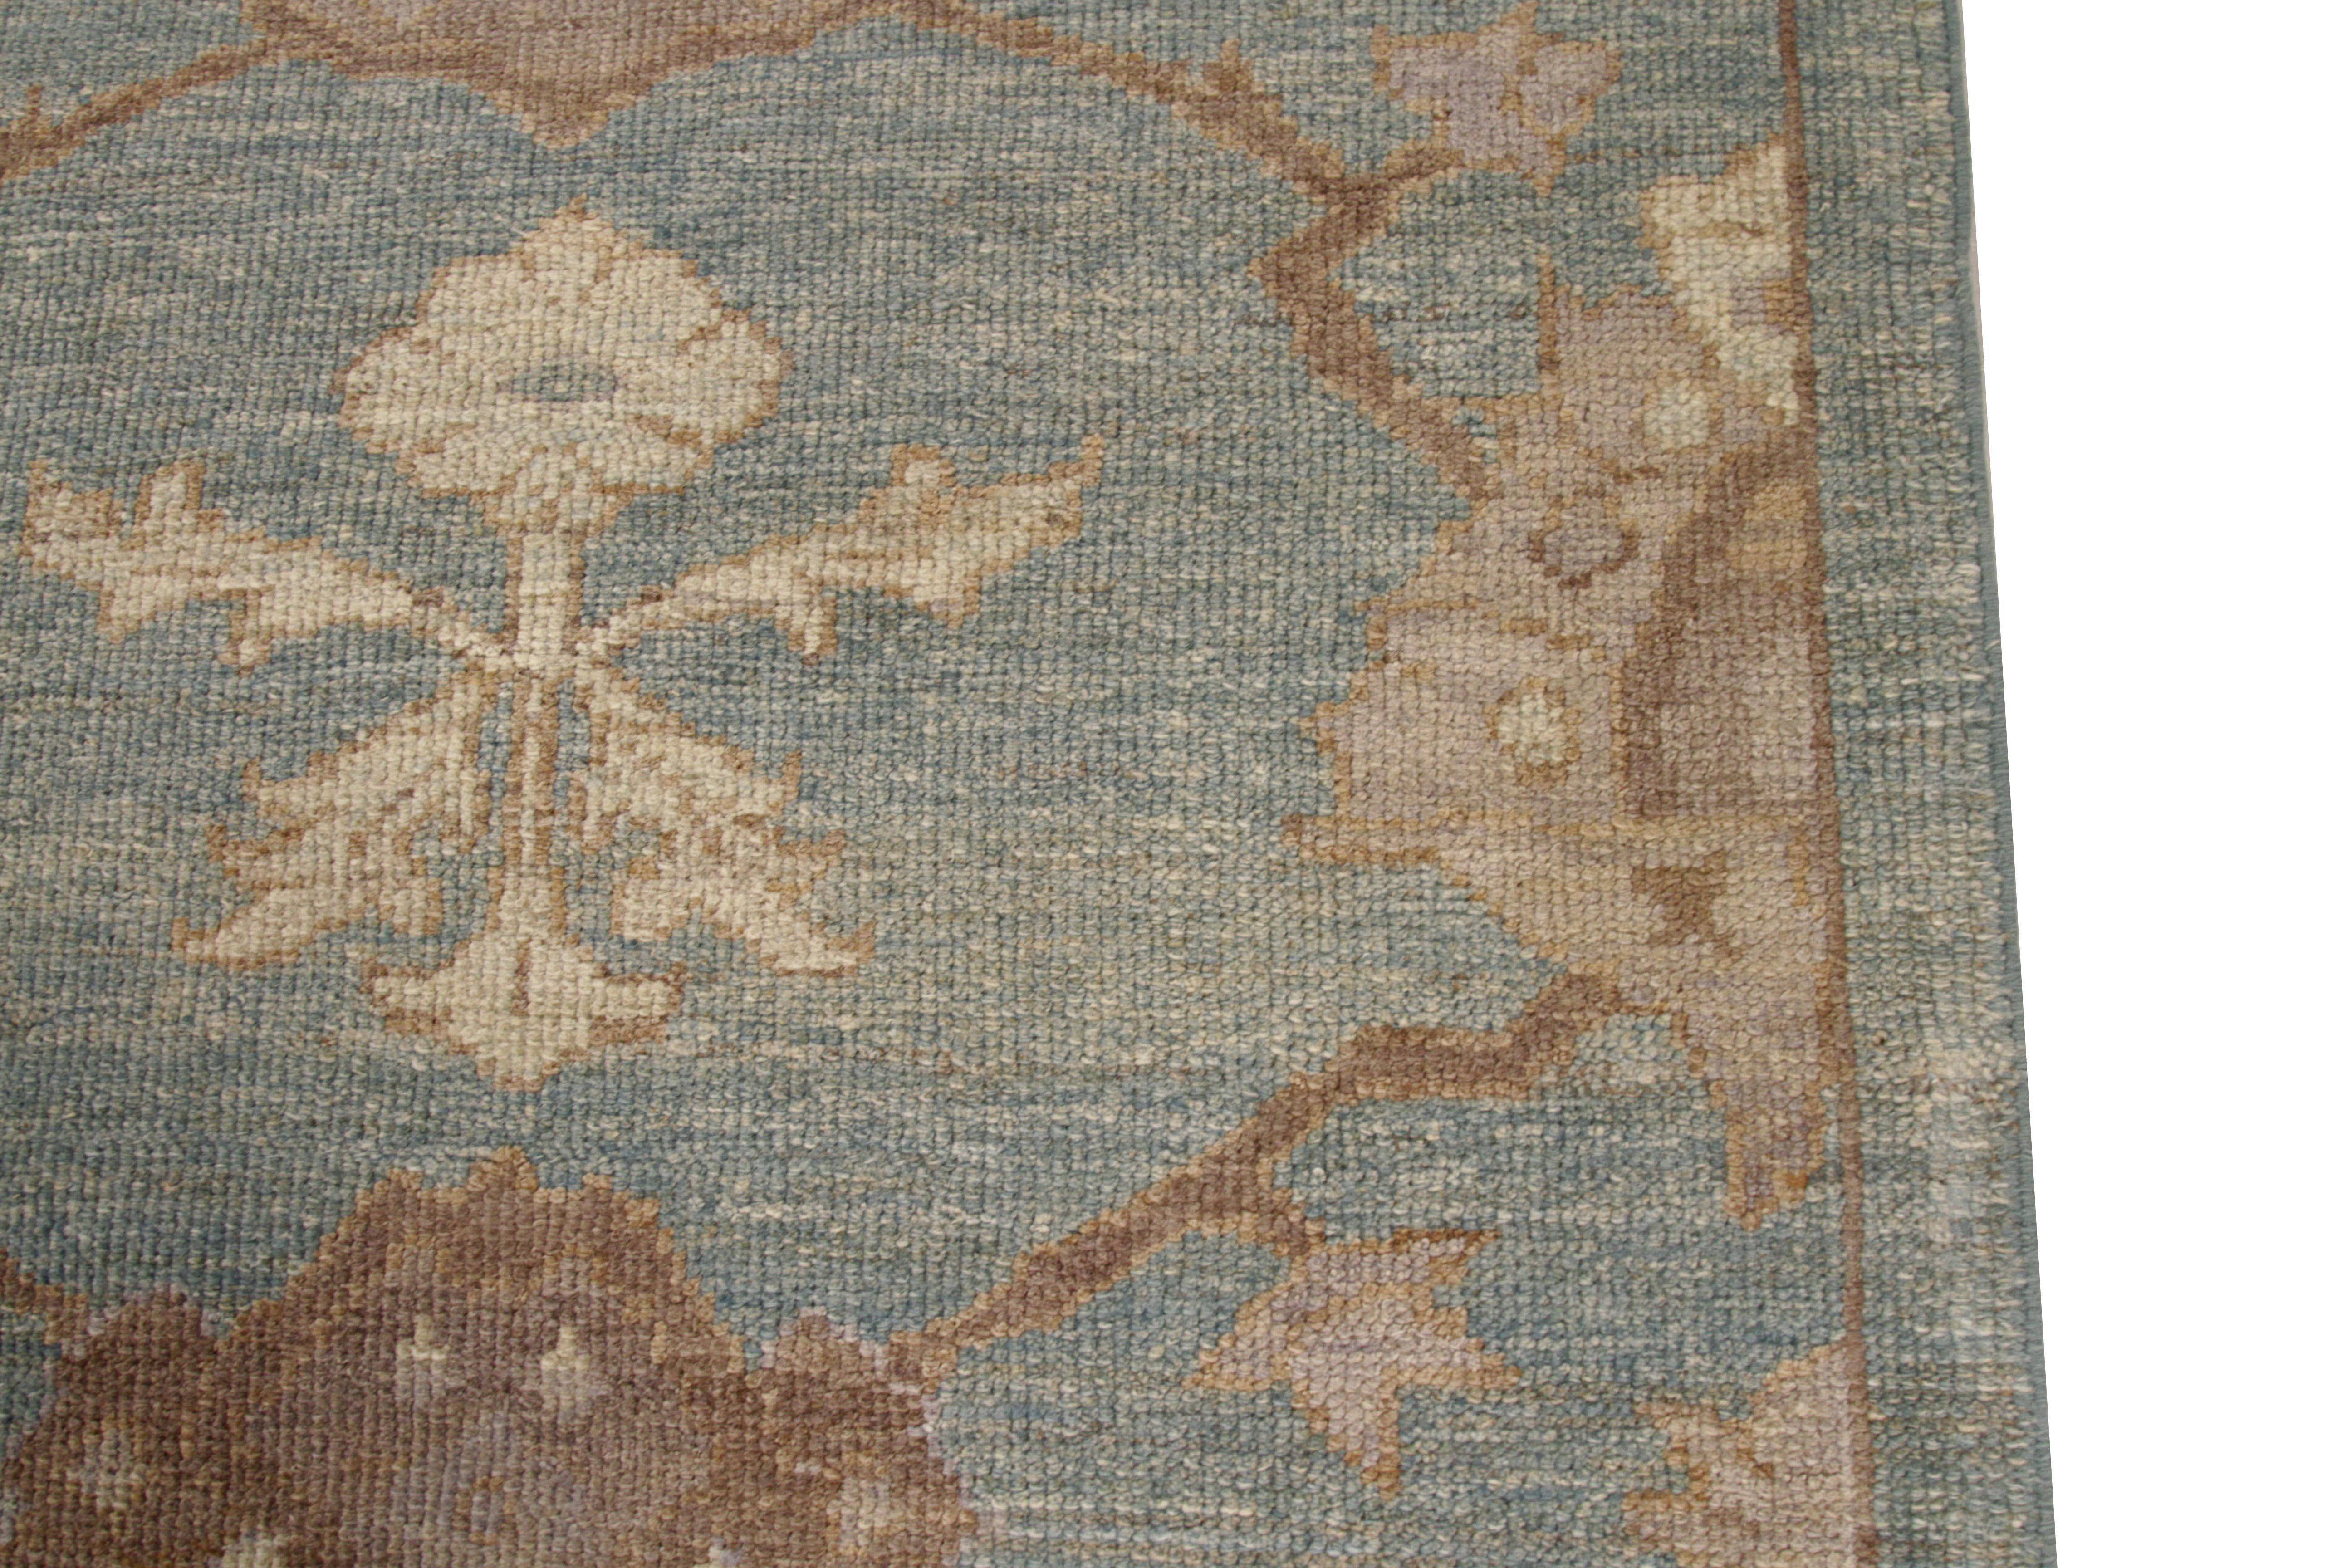 Wool Contemporary Oushak Persian Rug in Blue with Brown and Beige Flower Motif